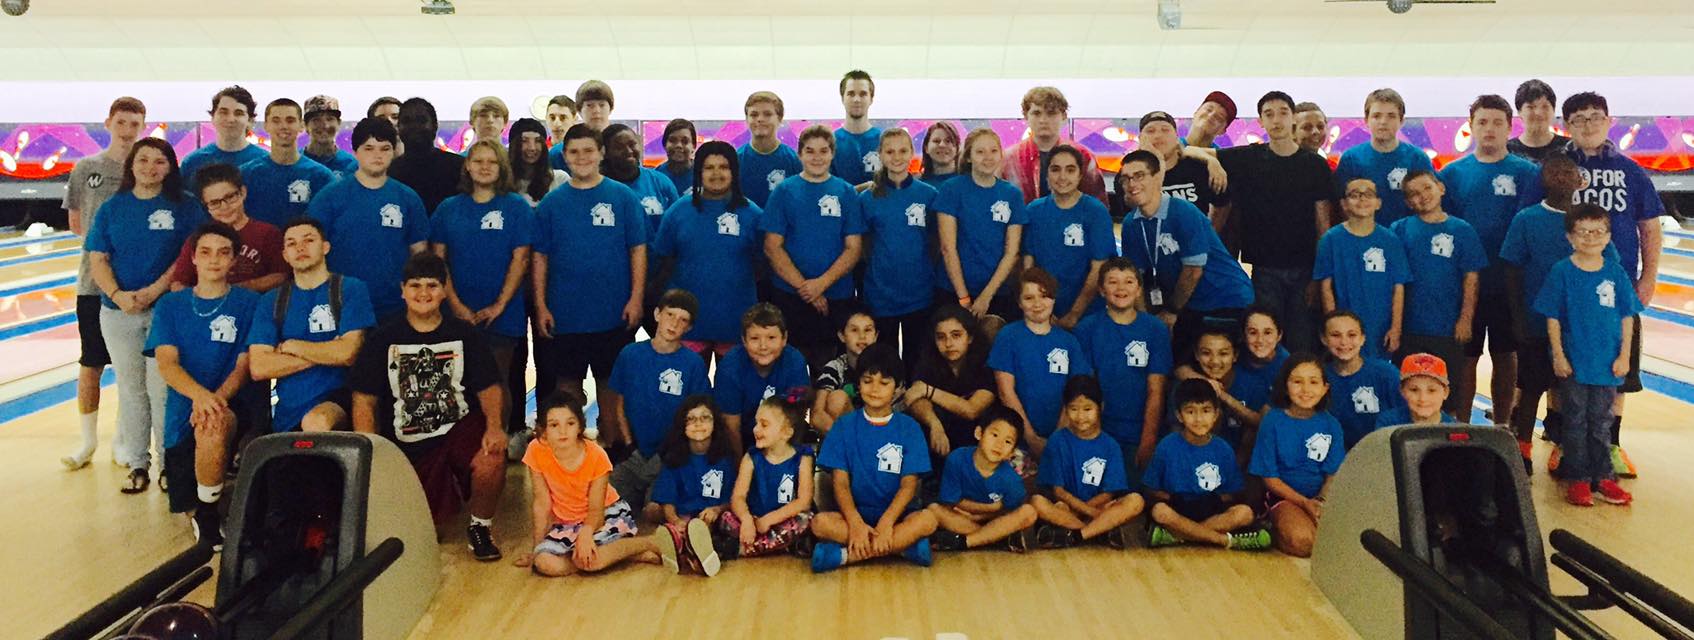 Youth Bowlers in a Group